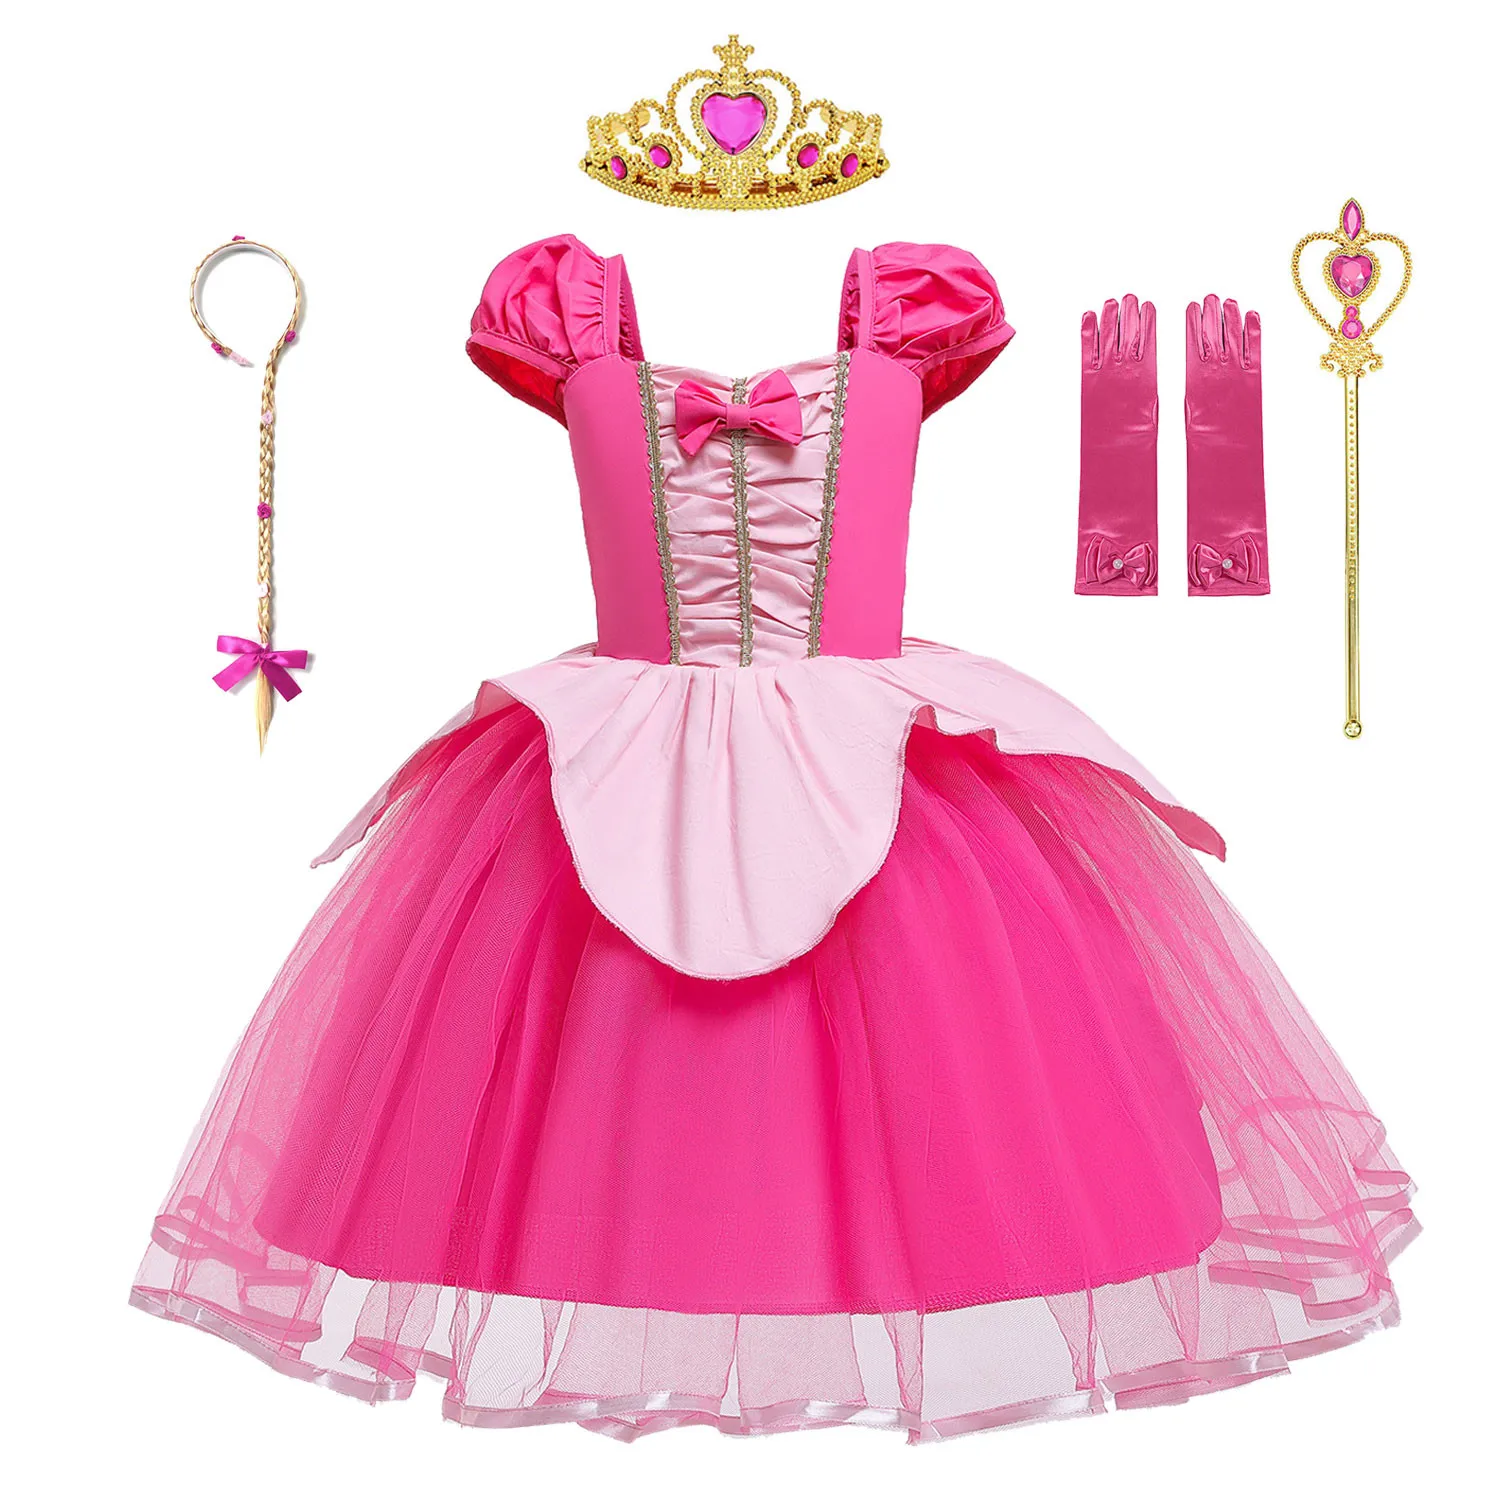 

Girls Aurora Dress Halloween Cosplay Sleeping Beauty Princess Dresses Kids Gorgeous Christmas Gift Fancy Birthday Party Outfits